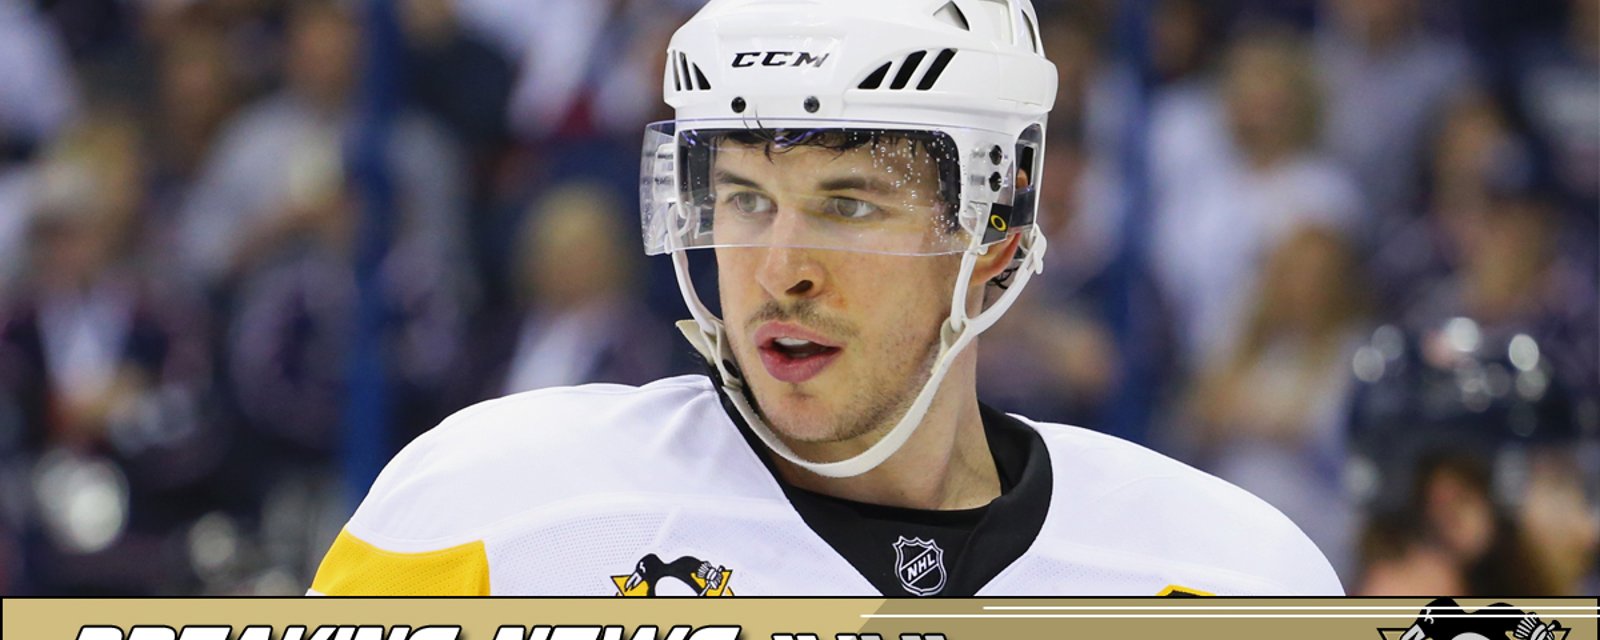 BREAKING: UNEXPECTED update on Sidney Crosby's situation.